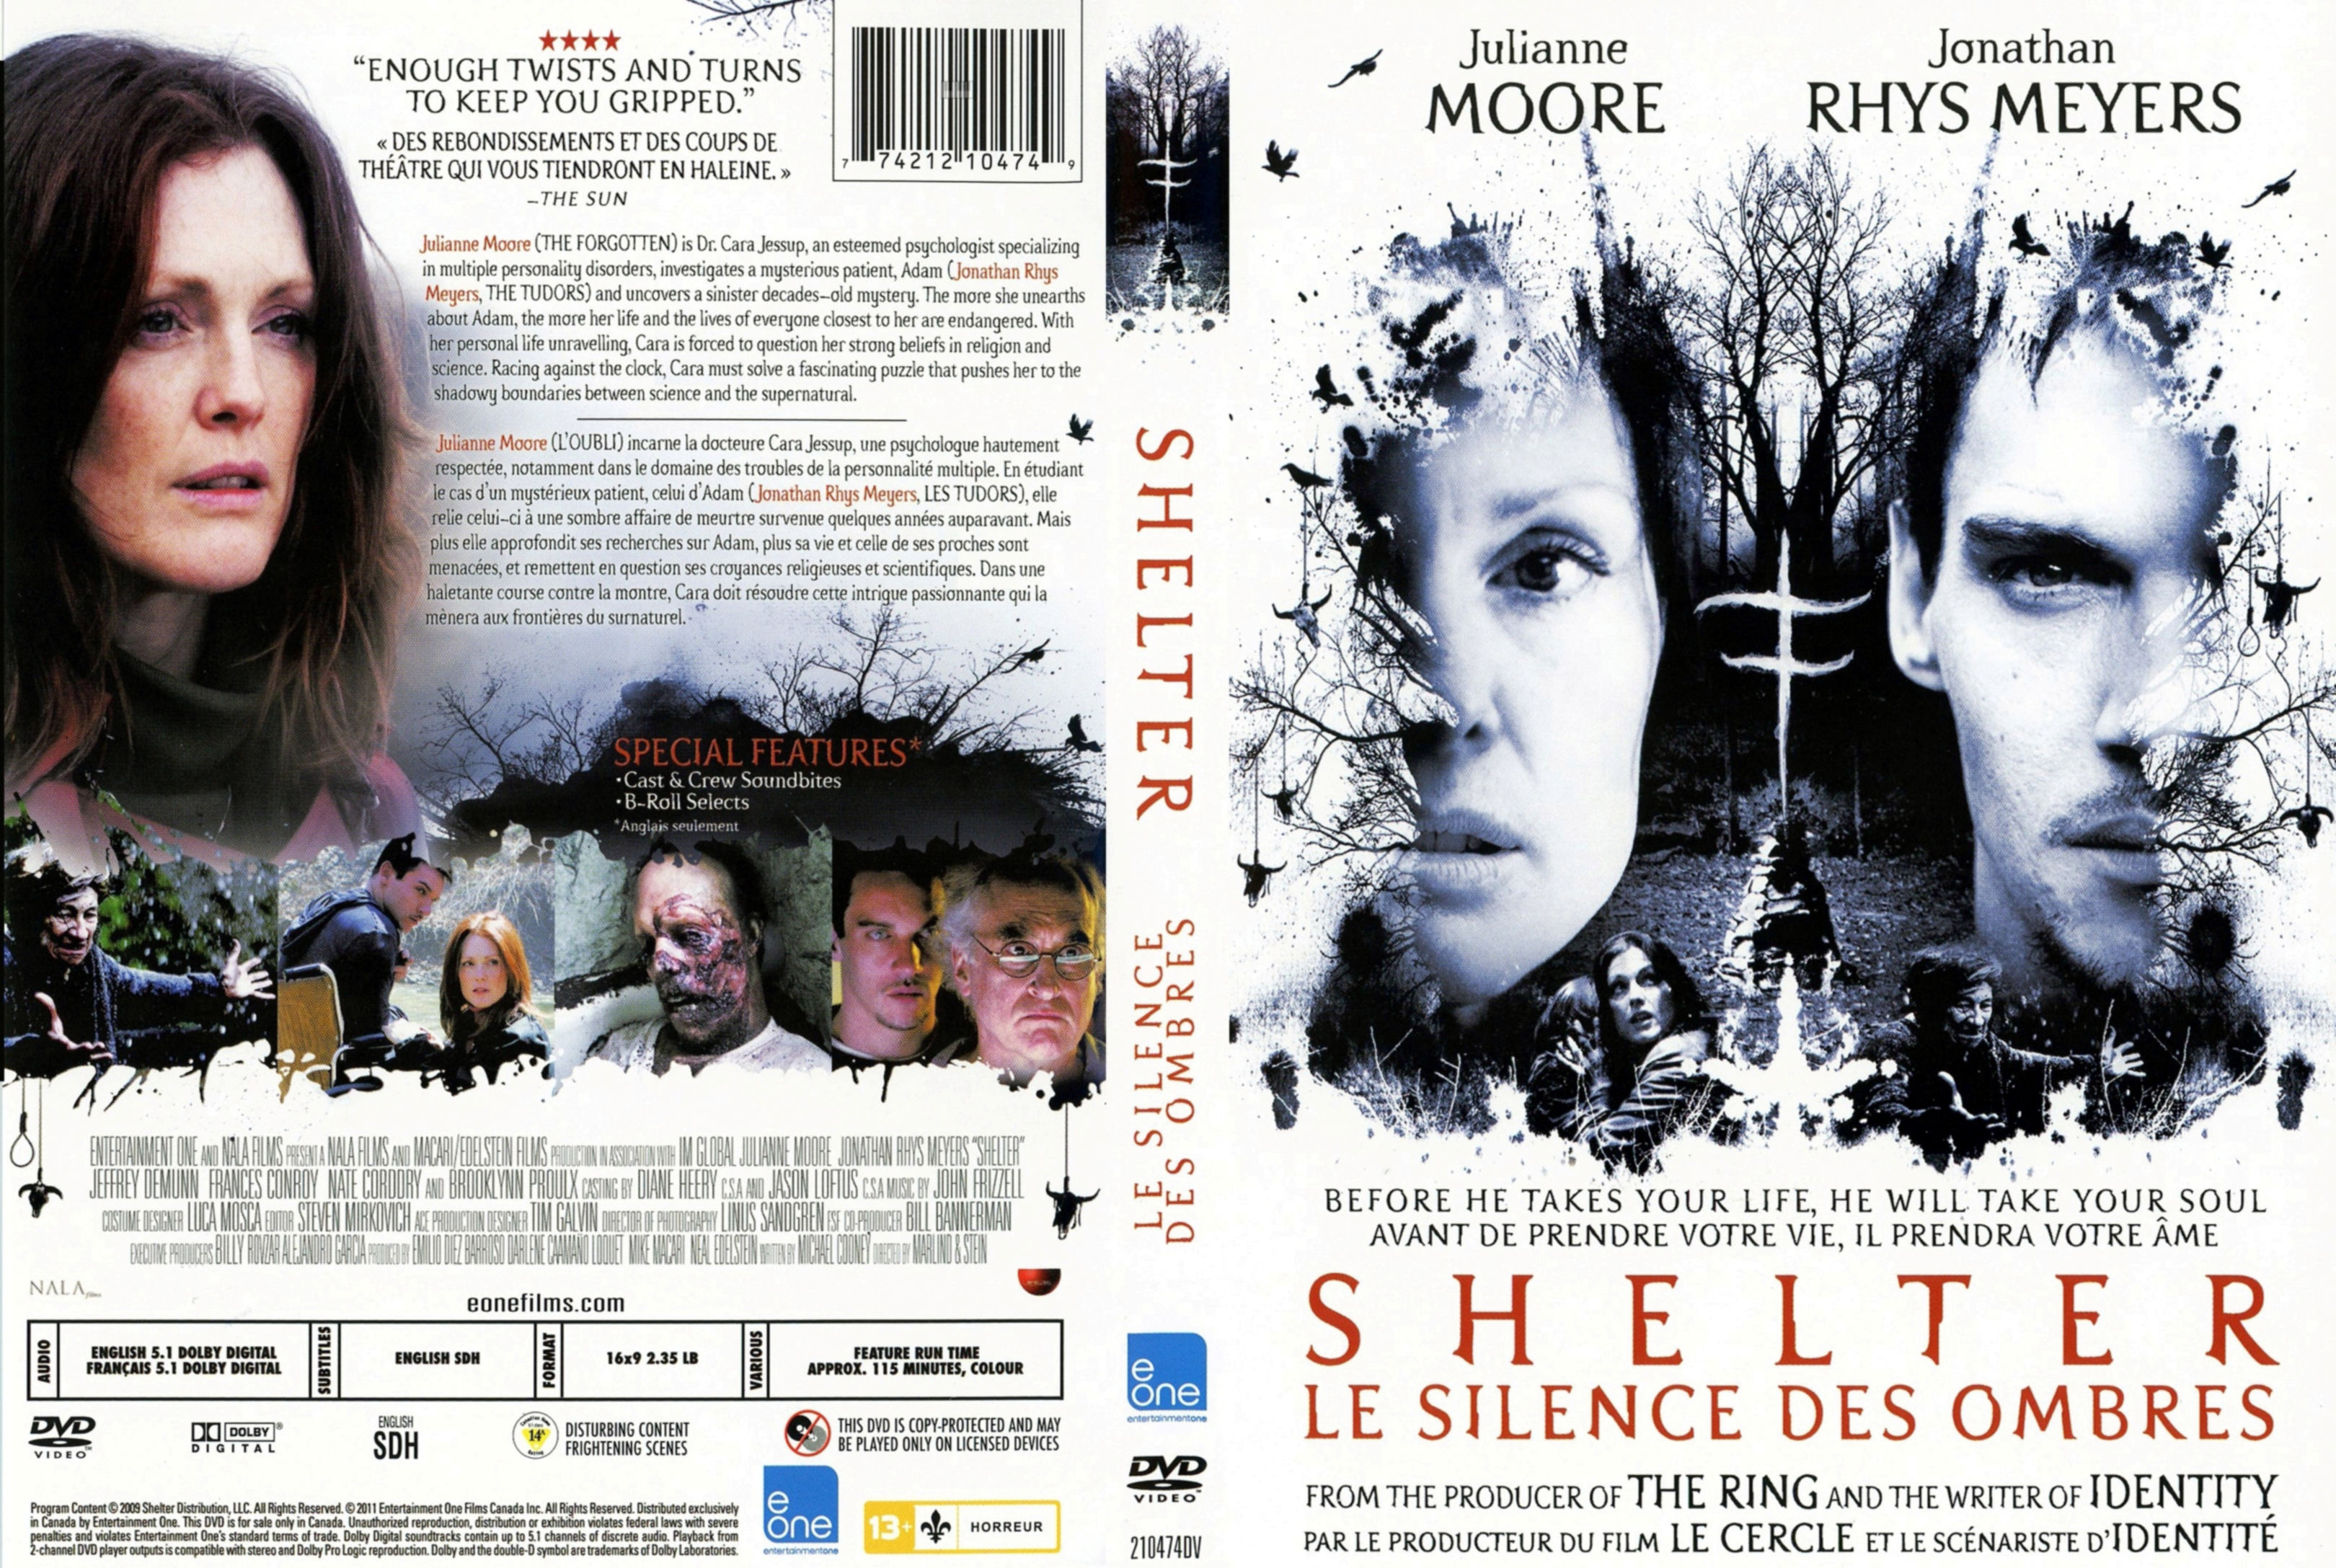 Jaquette DVD Le silence des ombres - Shelter (Canadienne)